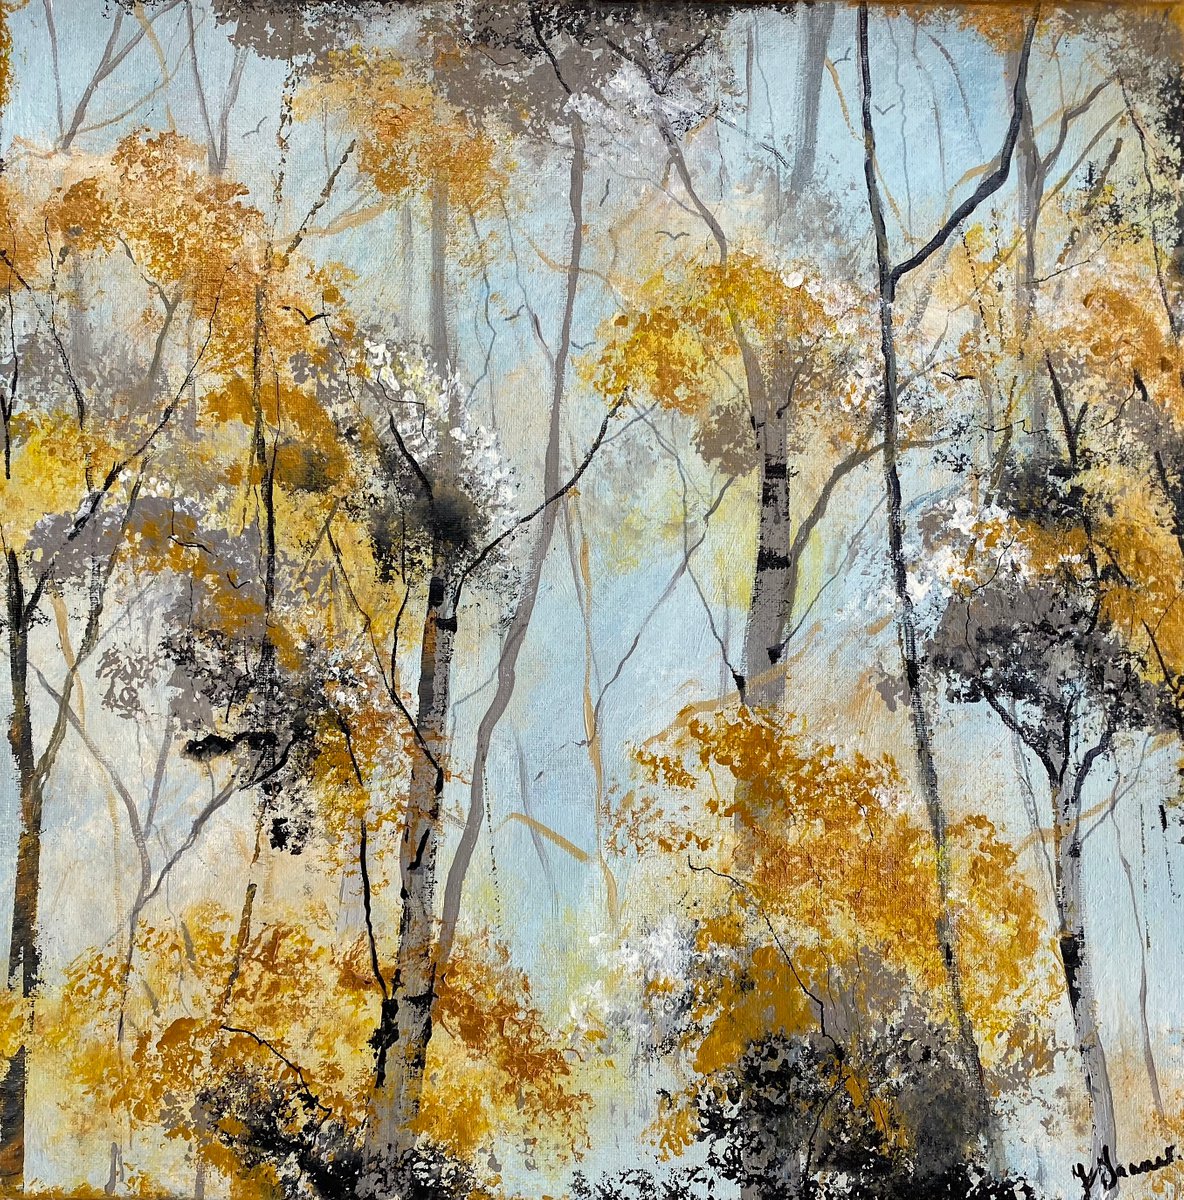 Early Autumn Silver Birches by Teresa Tanner